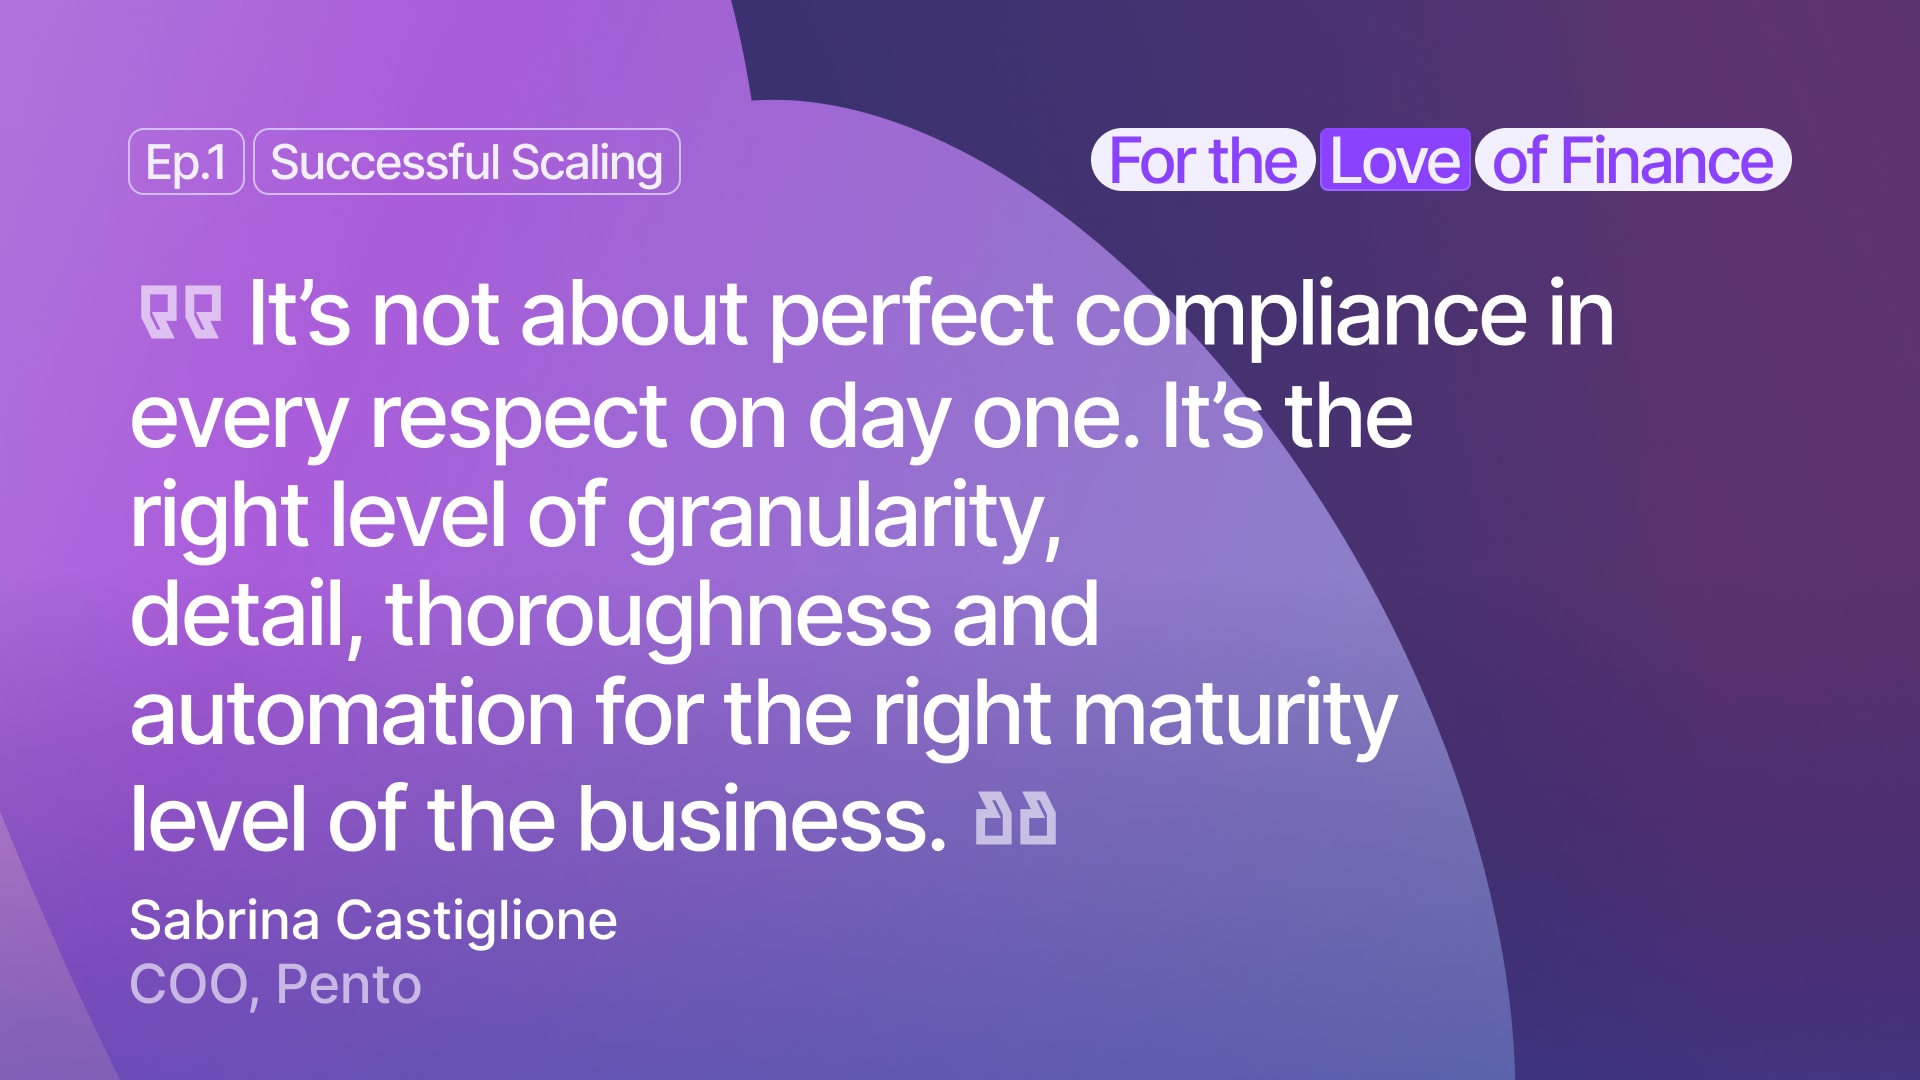 It’s not about perfect compliance in every respect on day one. It’s the right level of granularity, detail, thoroughness and automation for the right level of maturity of the business.